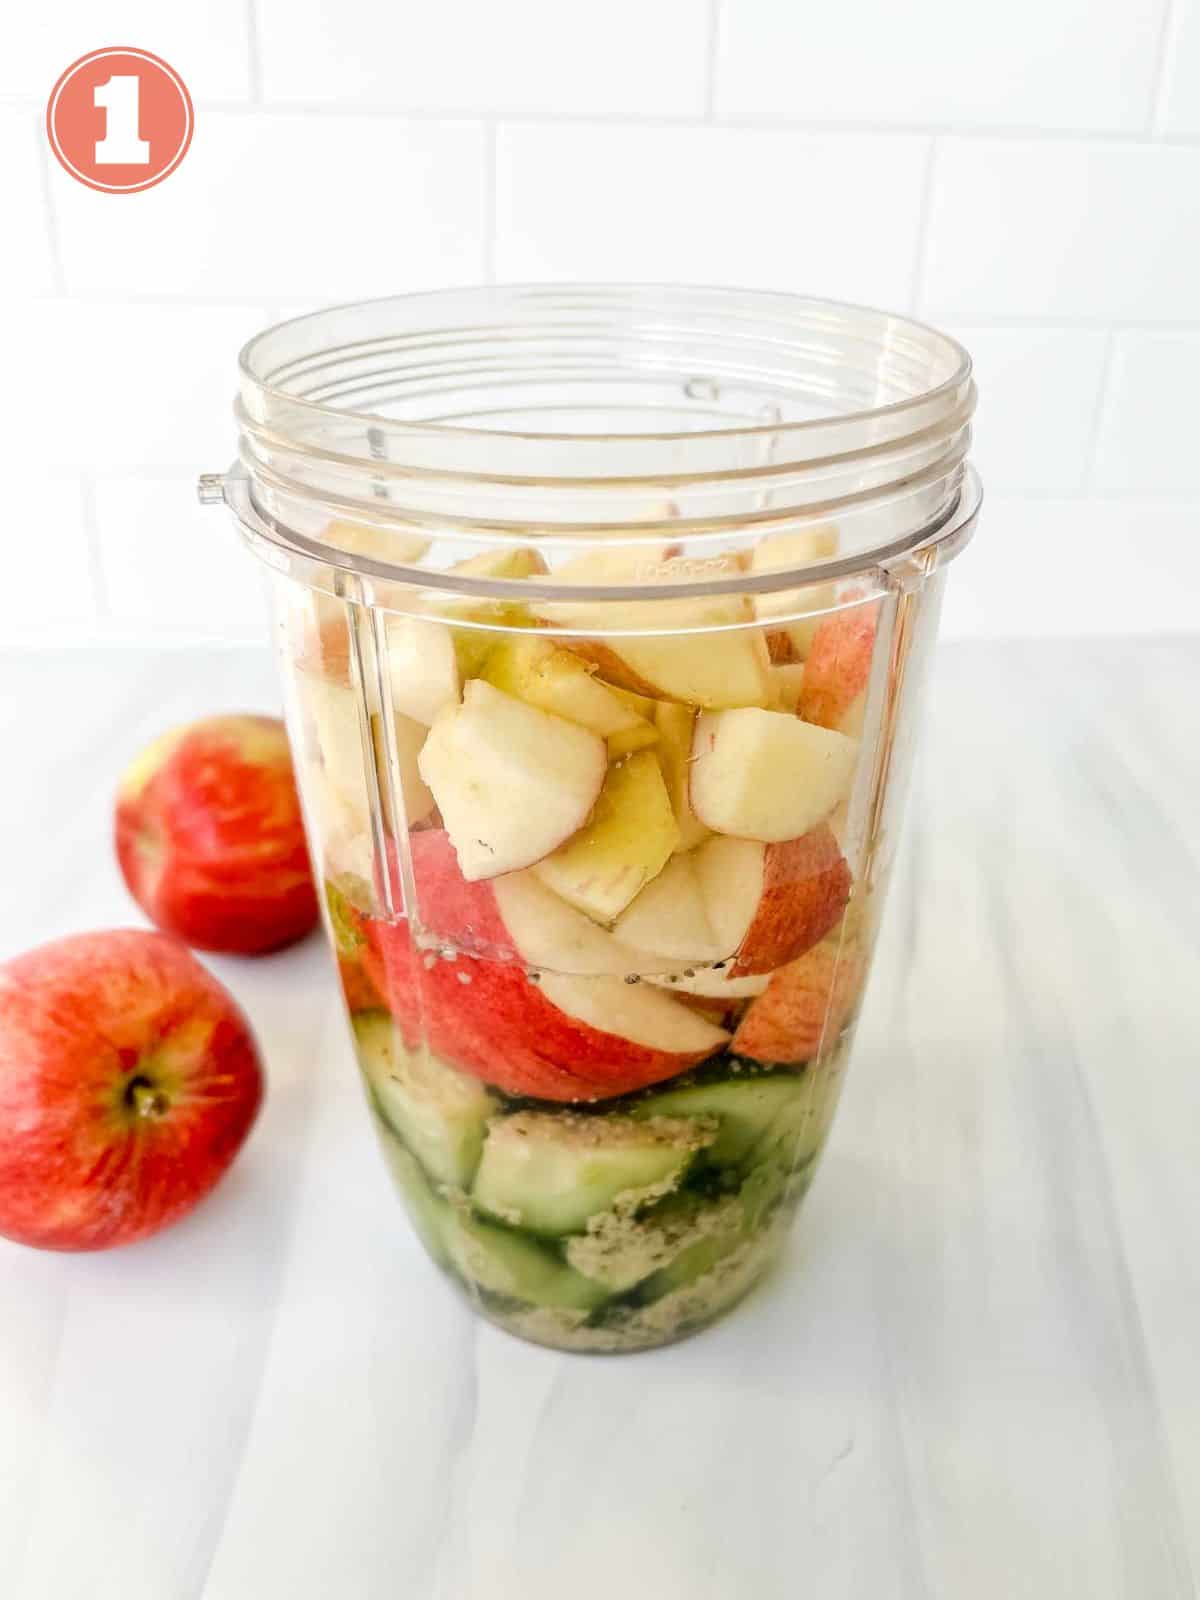 apples, cucumber, seeds and water in a blender cup next to red apples labelled number one.